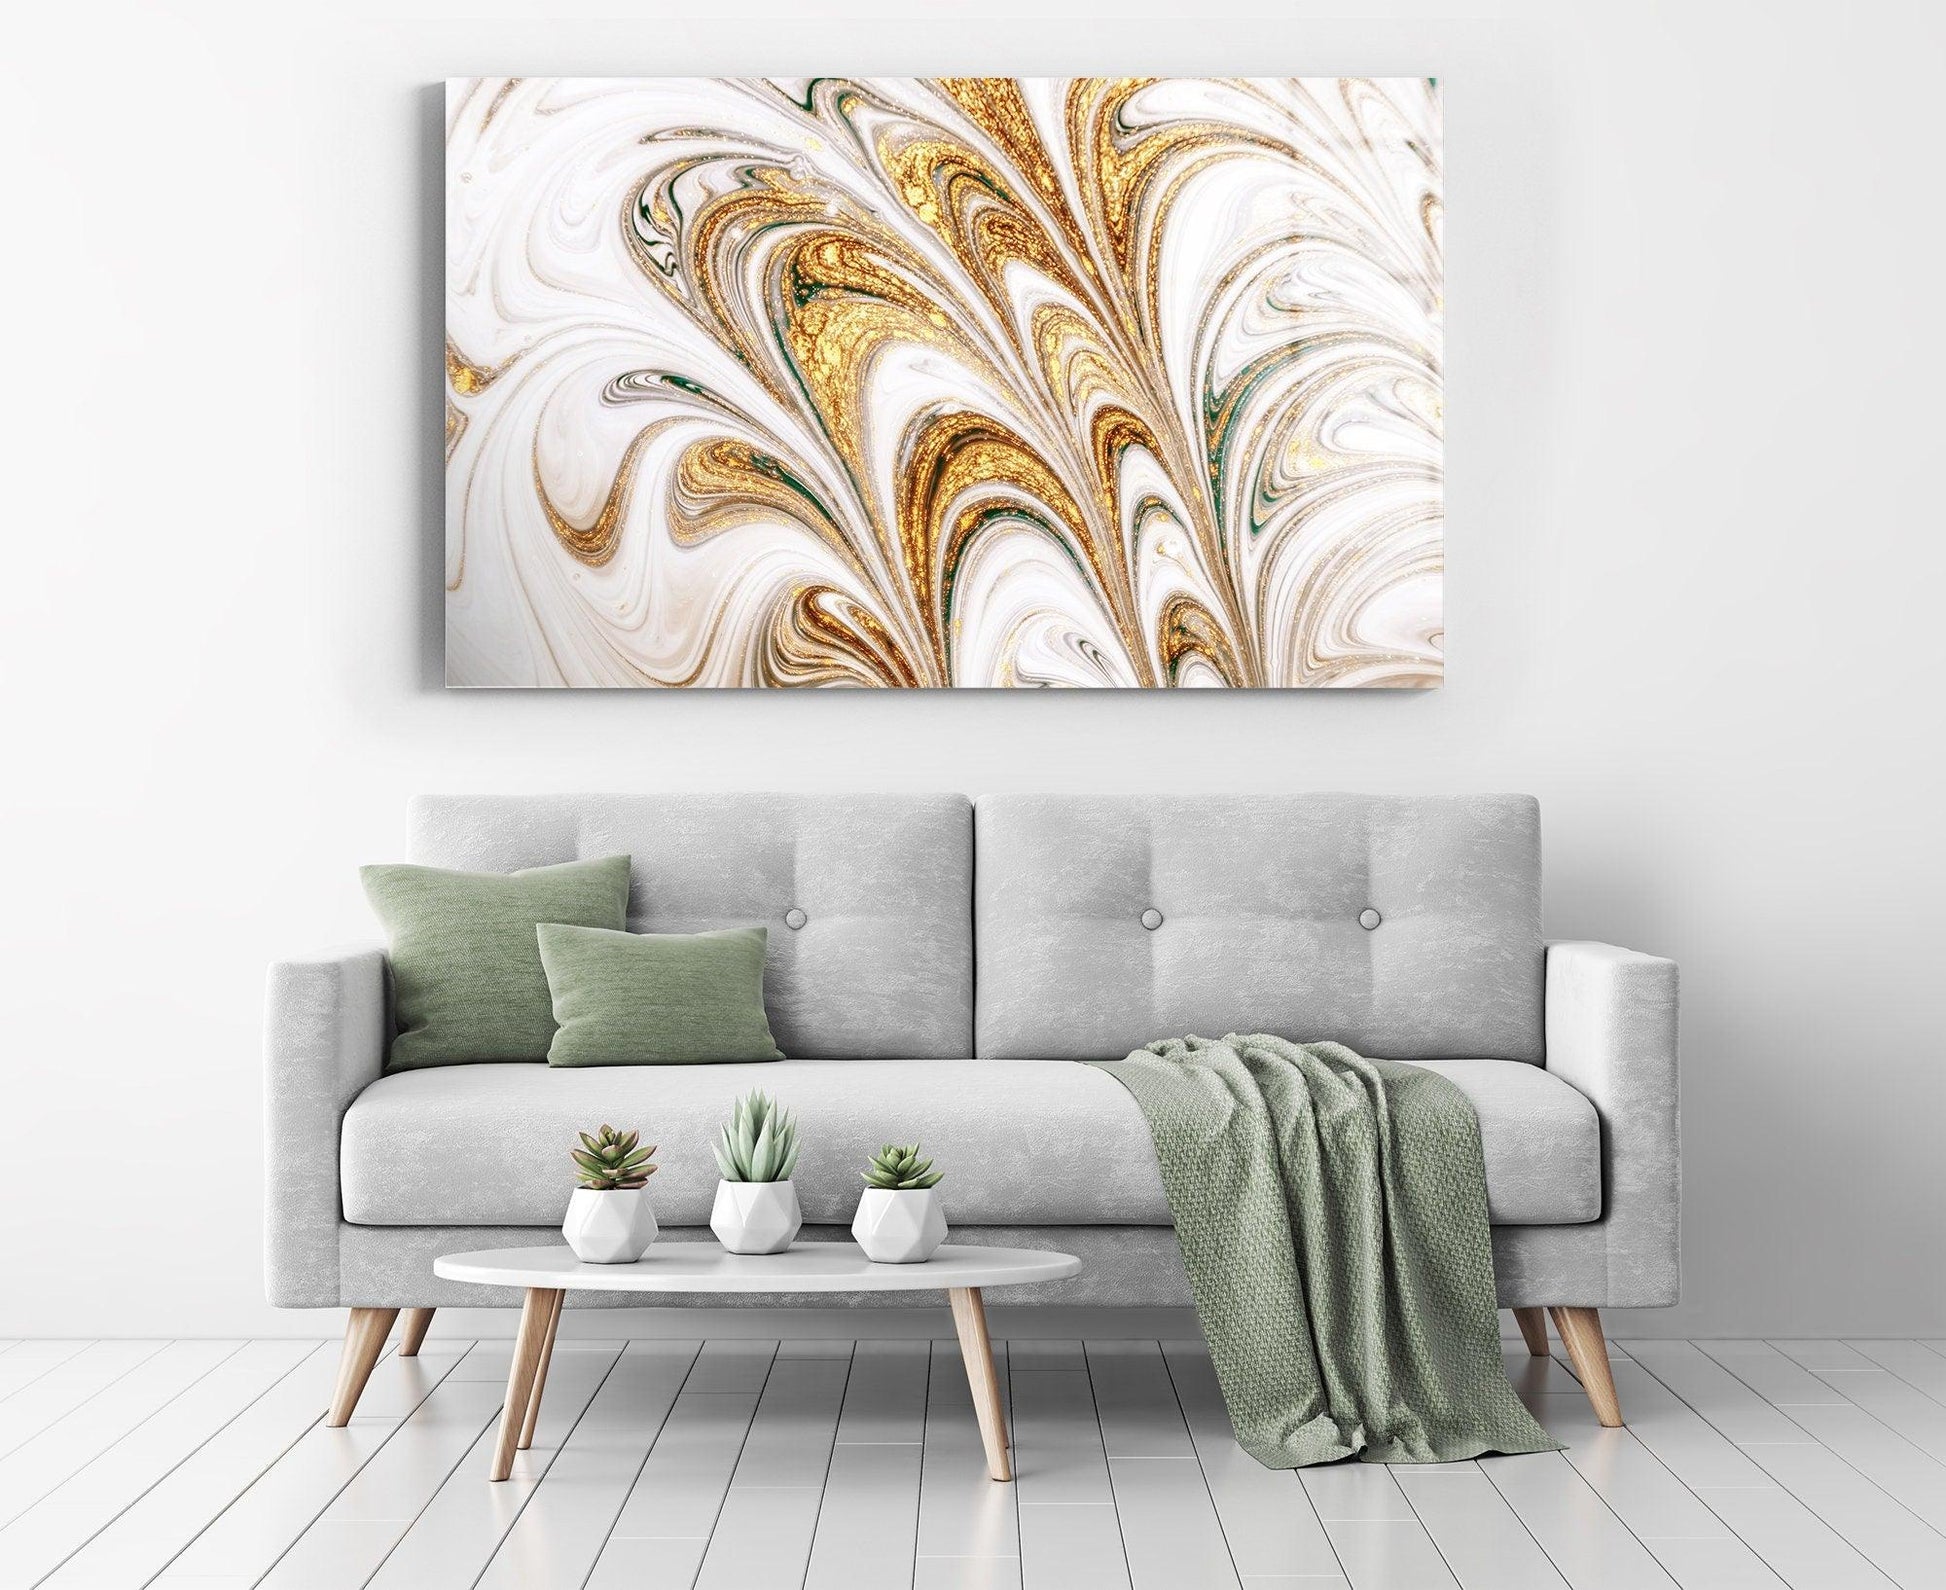 white and Gold glass Wall Art| Gold glass Wall Art, Marble Wall Decor, Gold Wall Decor, Extra Large Wall Art, gold bedroom decor - TrendiArt